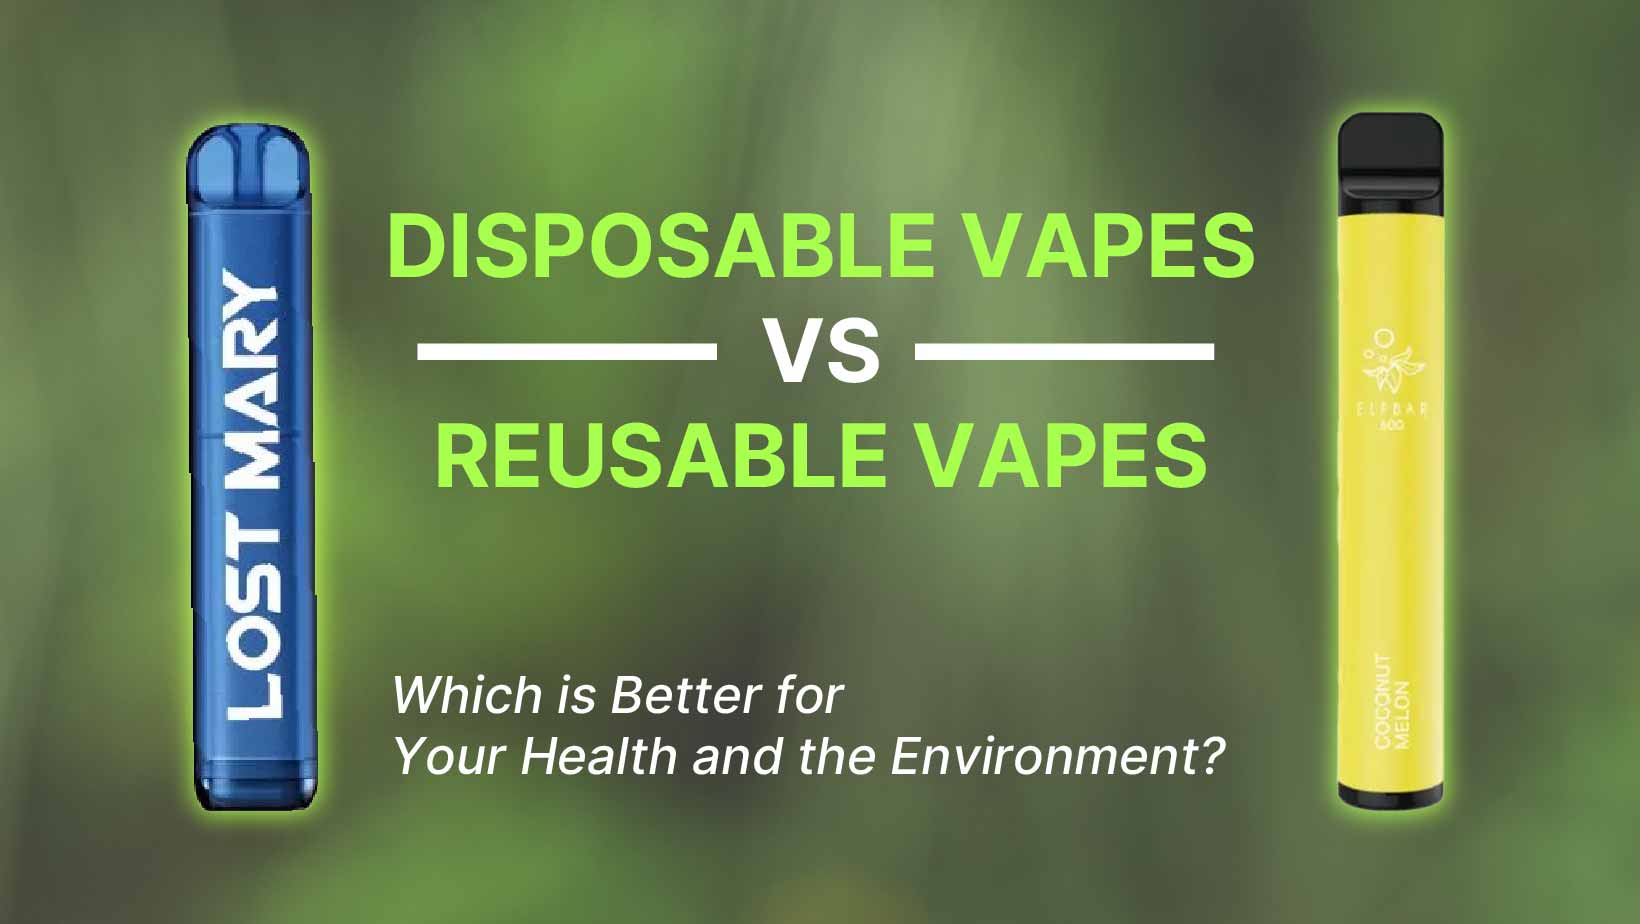 Disposable Vapes vs. Reusable Vapes Which is Better?